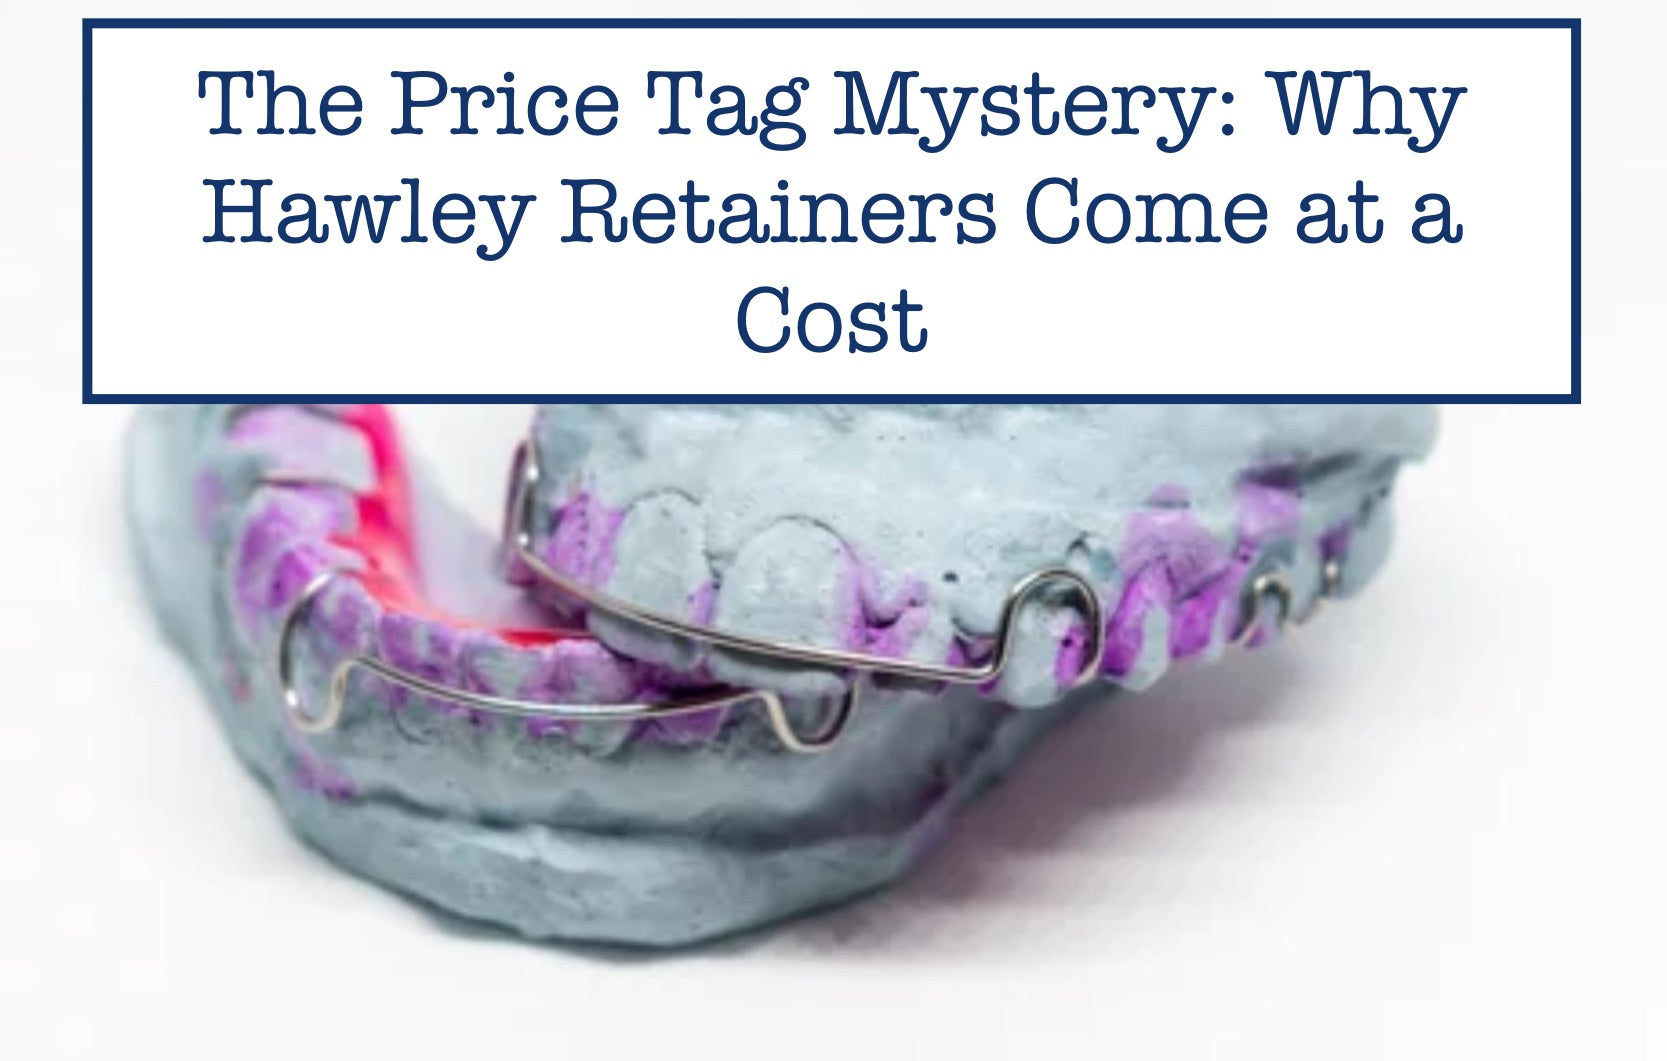 The Price Tag Mystery: Why Hawley Retainers Come at a Cost